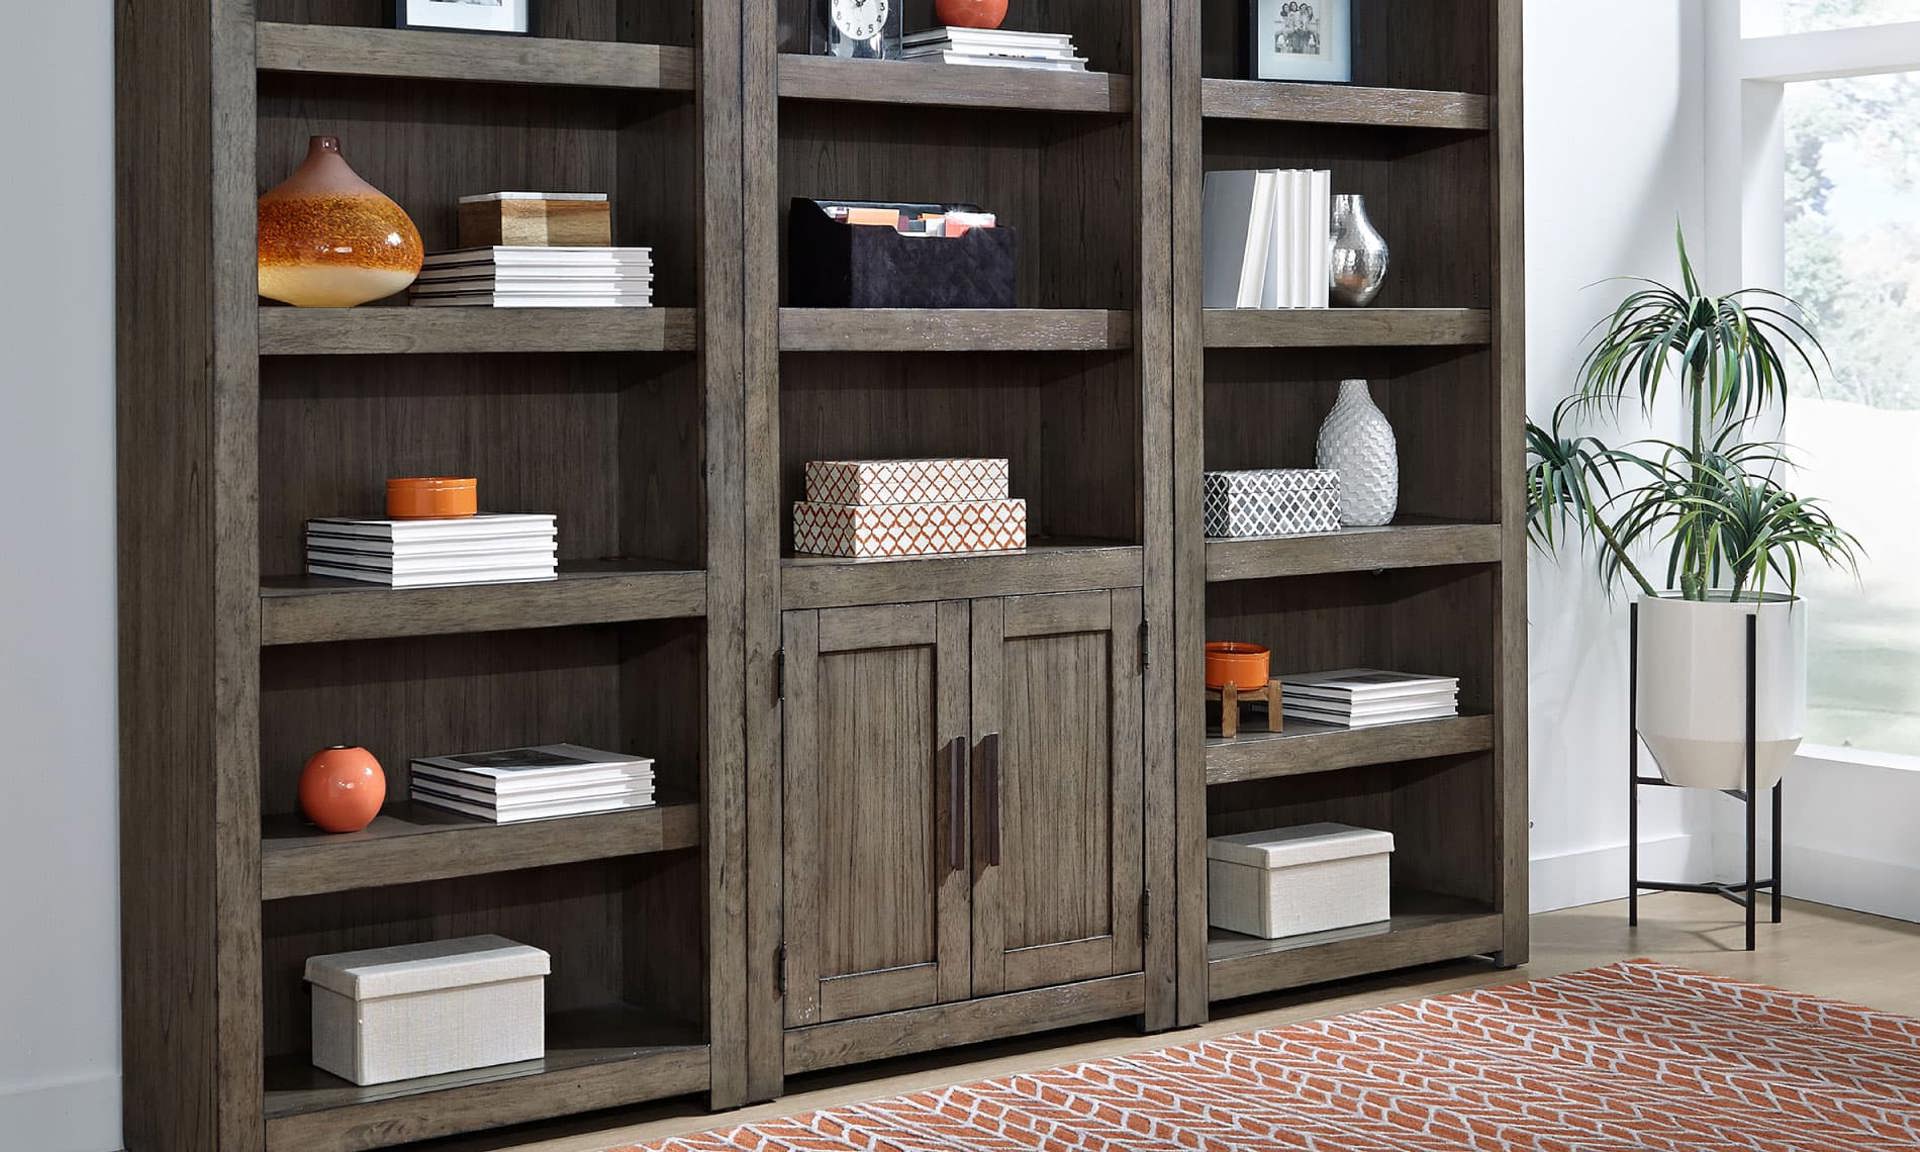 From modern to rustic we have affordable bookcases that are durable and will last.